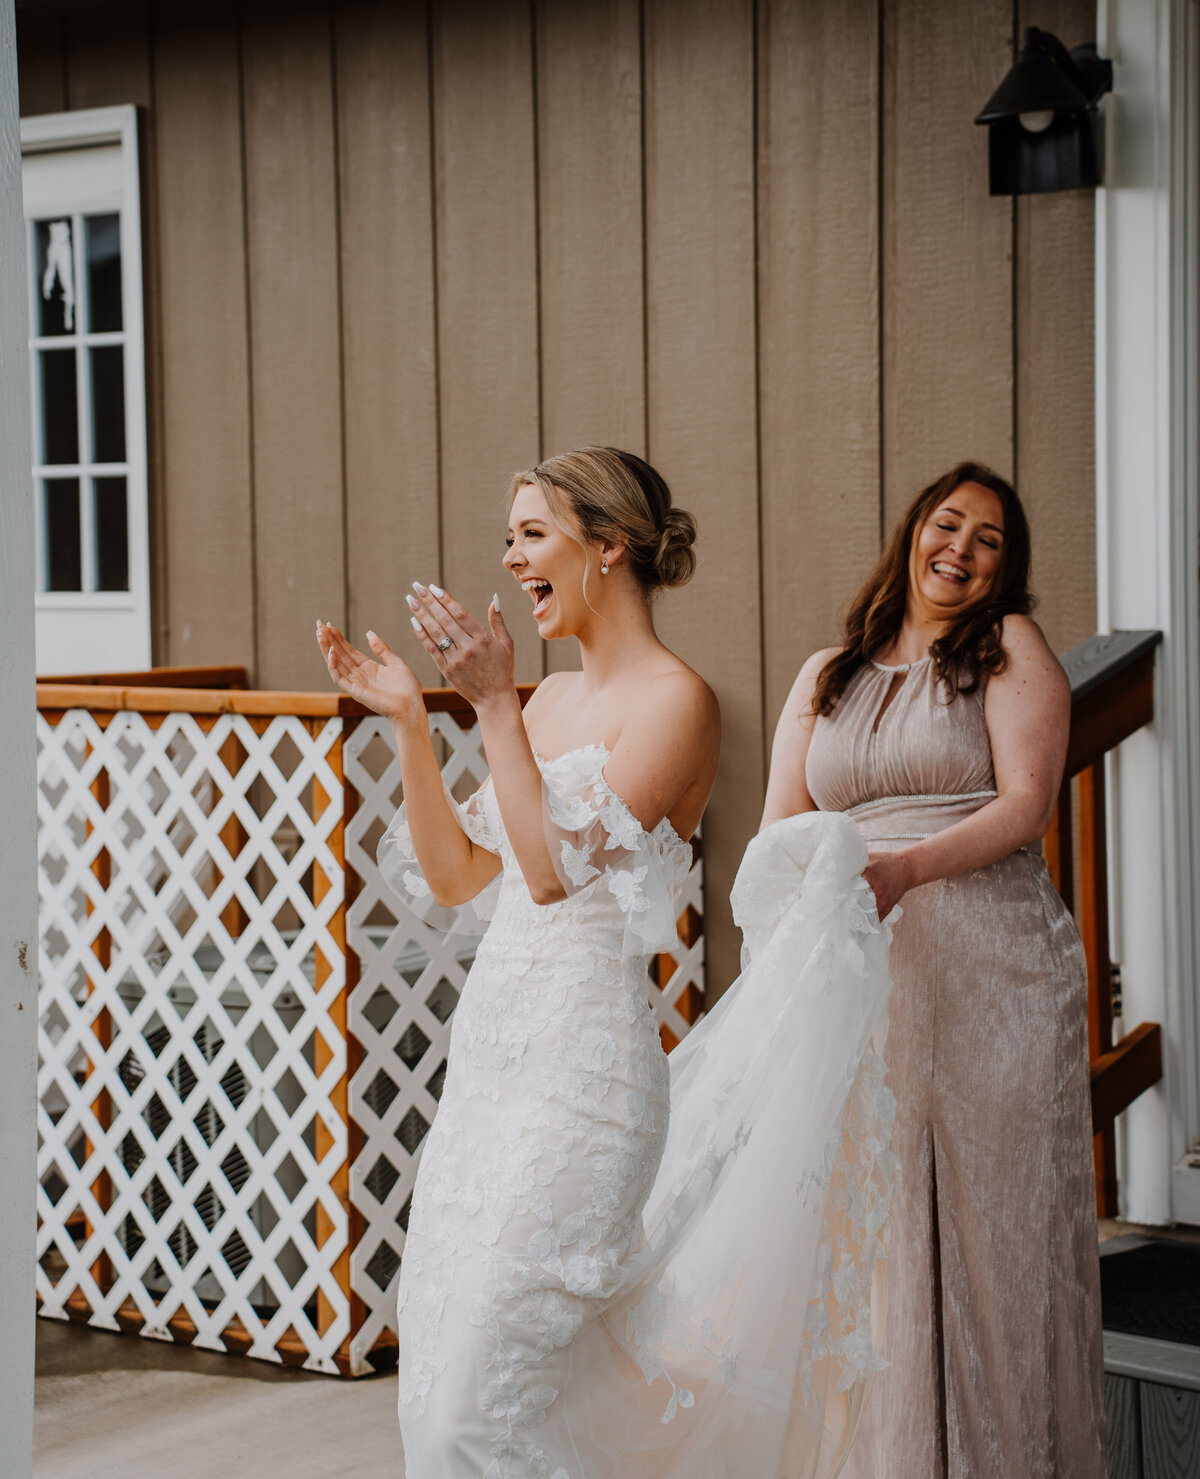 Bride smiling while mother holds her dress train